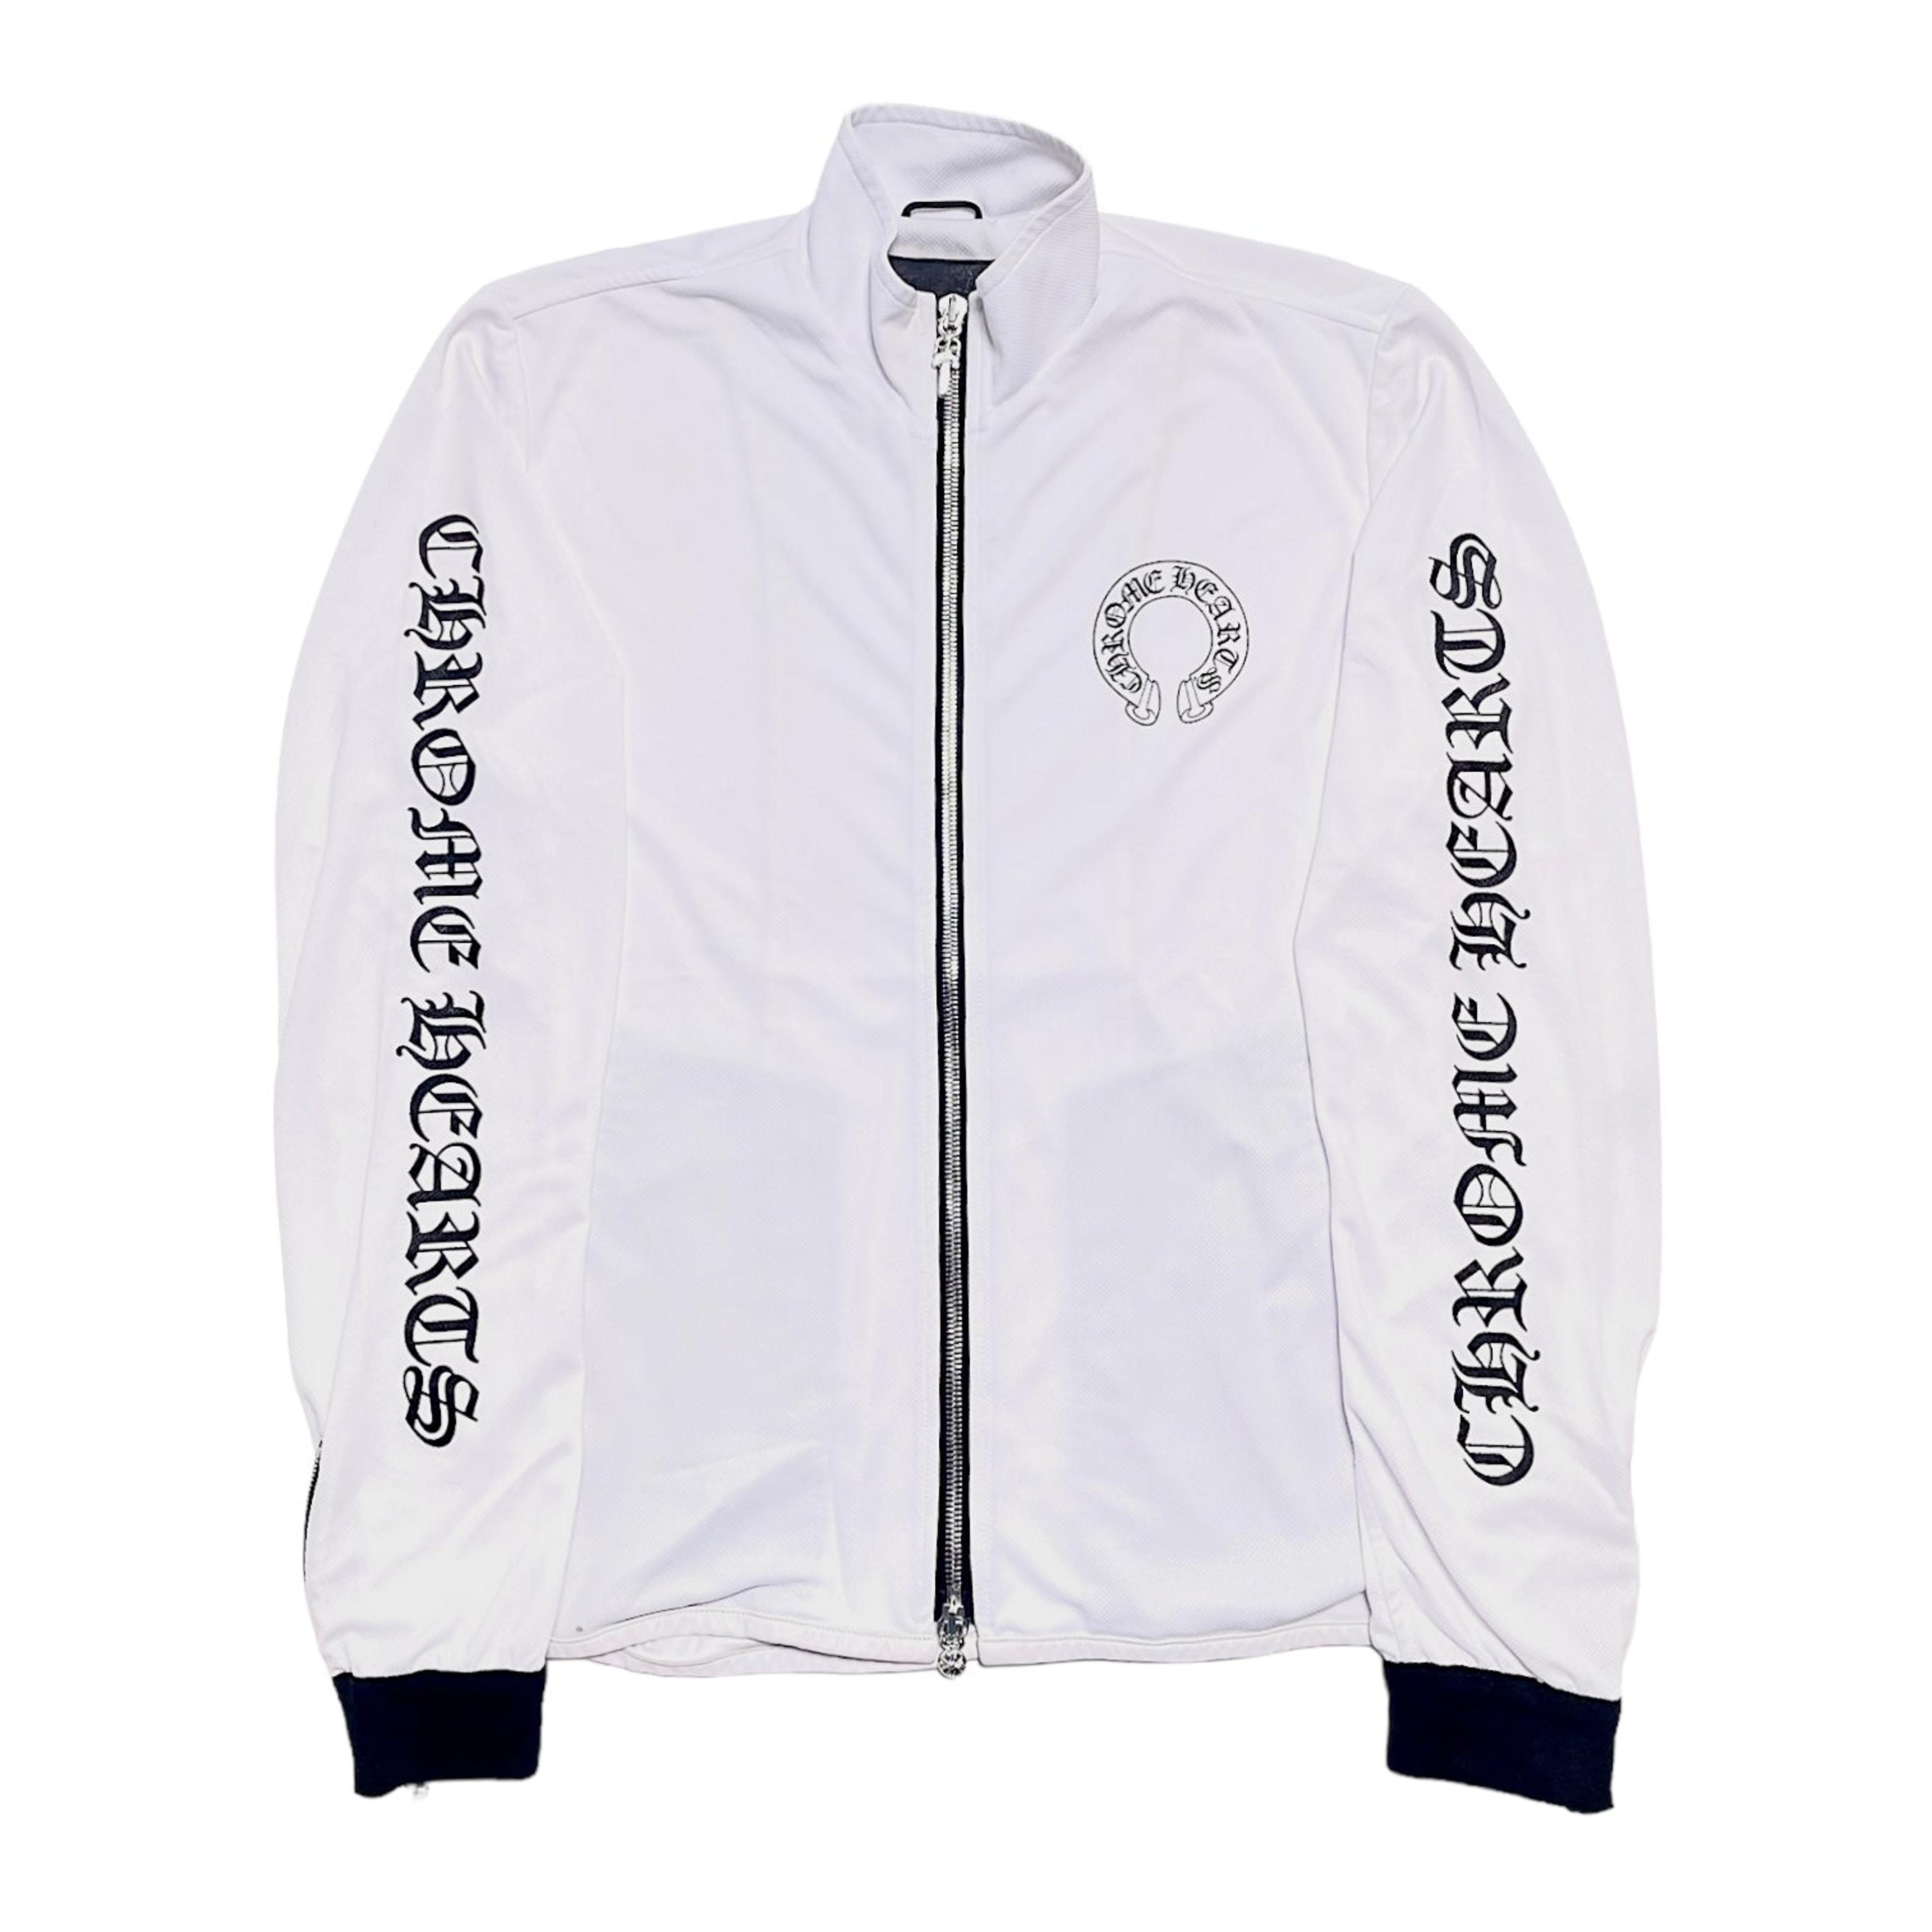 Chrome Hearts Jersey Track Jacket White Black Pre-Owned